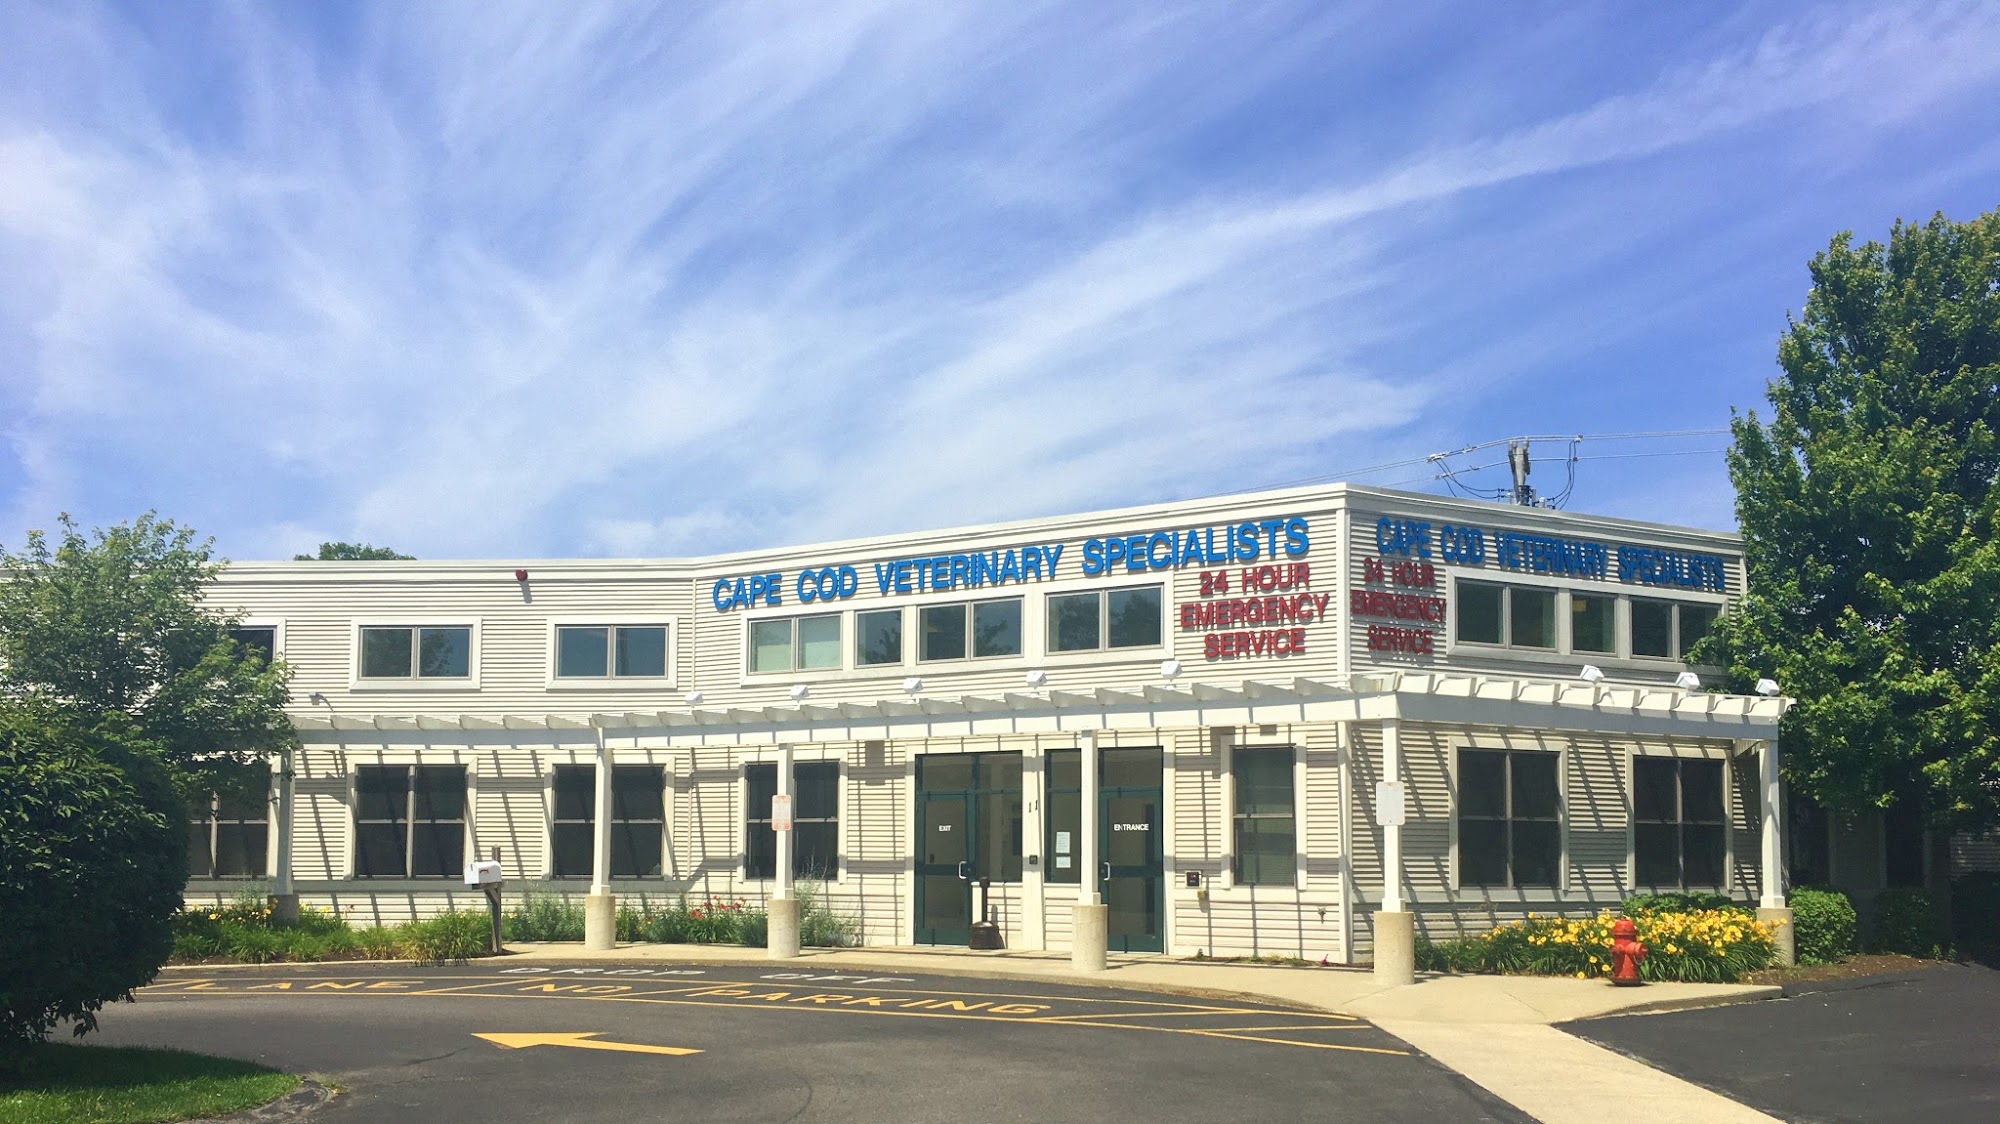 Cape Cod Veterinary Specialists